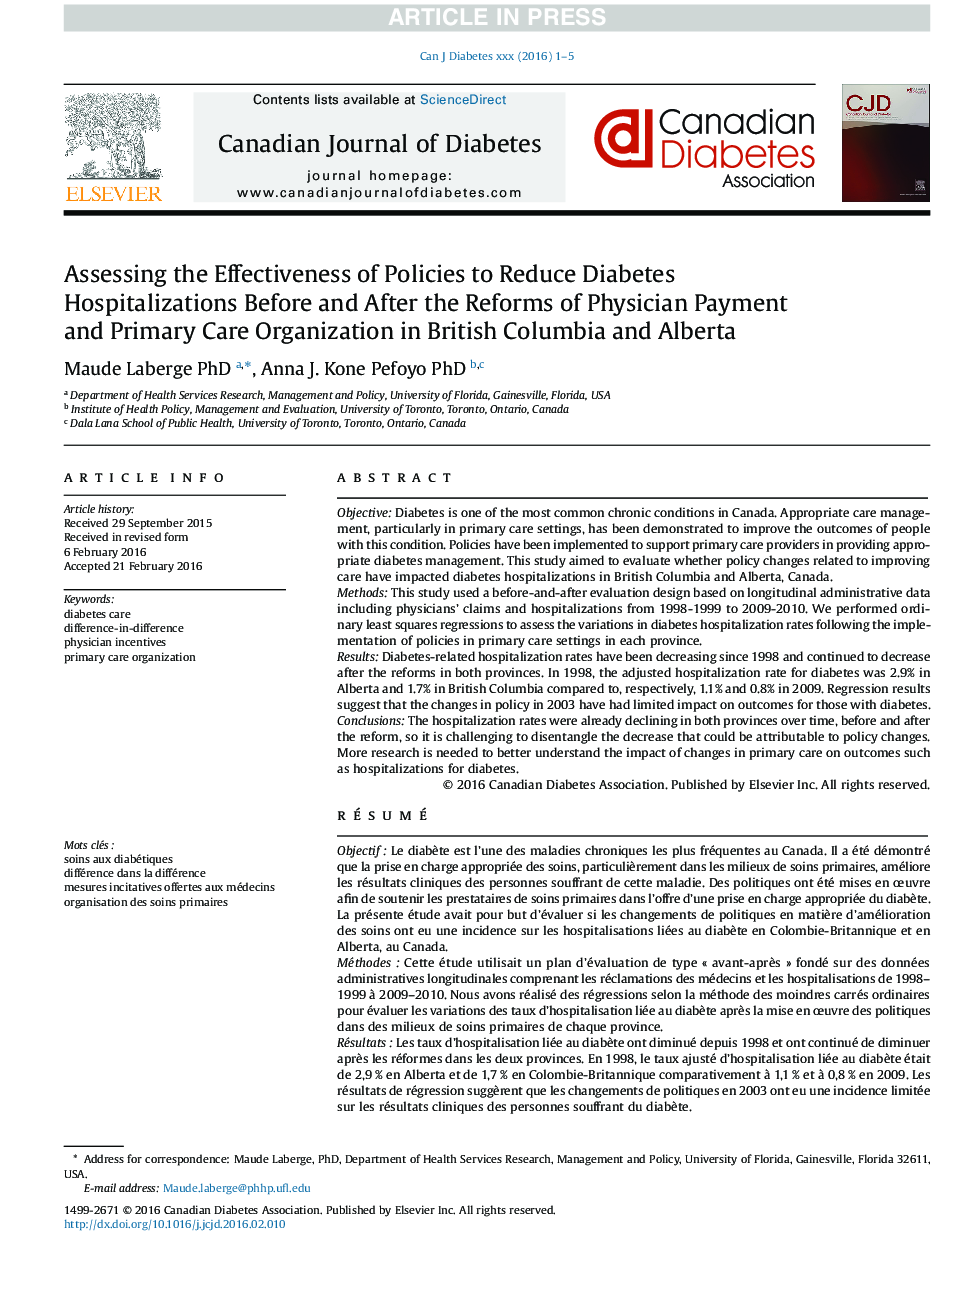 Assessing the Effectiveness of Policies to Reduce Diabetes Hospitalizations Before and After the Reforms of Physician Payment and Primary Care Organization in British Columbia and Alberta